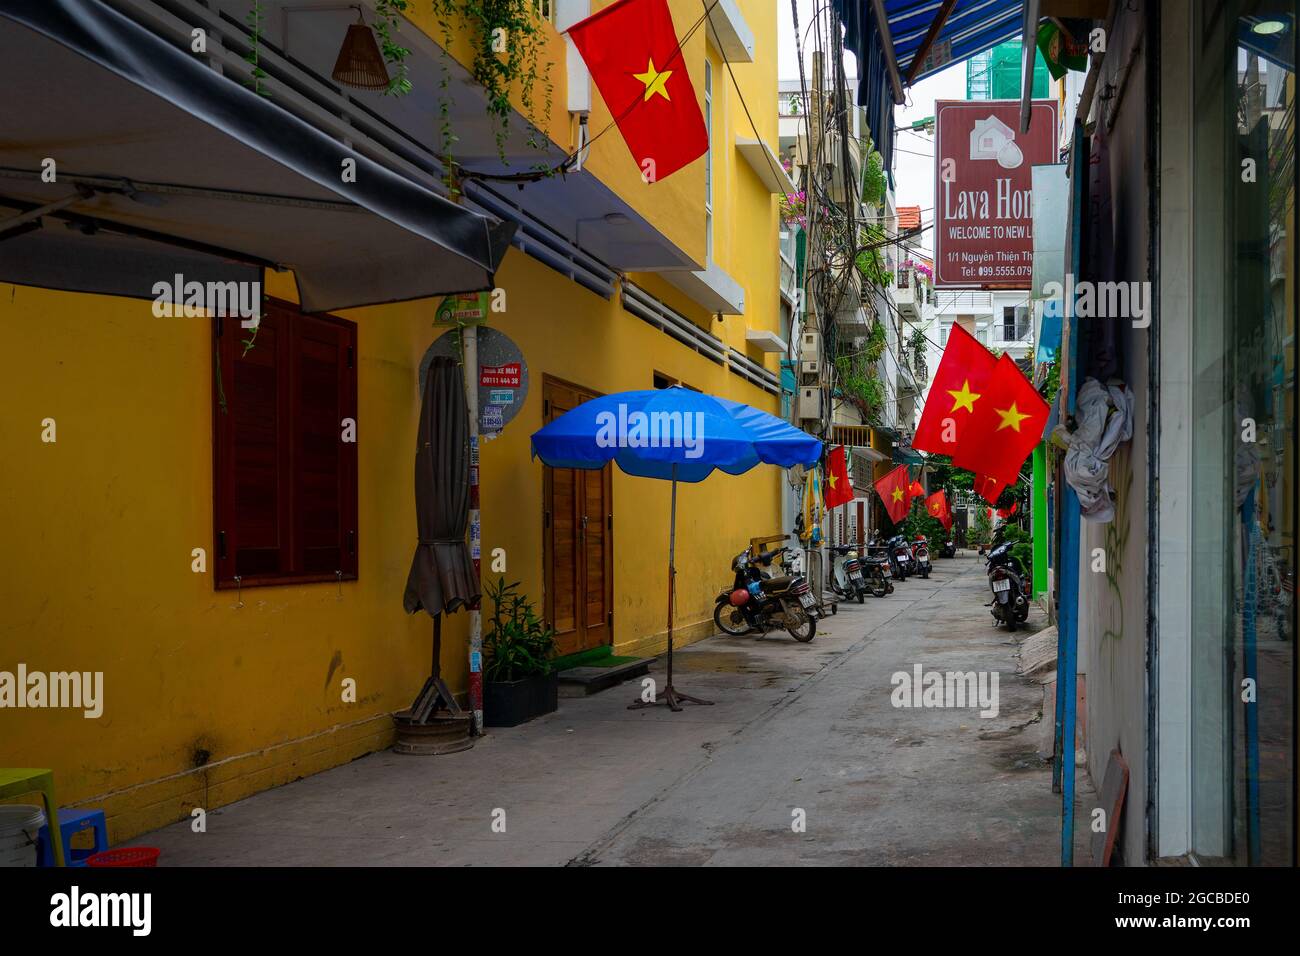 National Day in Vietnam - flag hung in front of houses in a small alley in the city of Nha Trang.  Nha Trang, Vietnam: 2020-10-13 Stock Photo